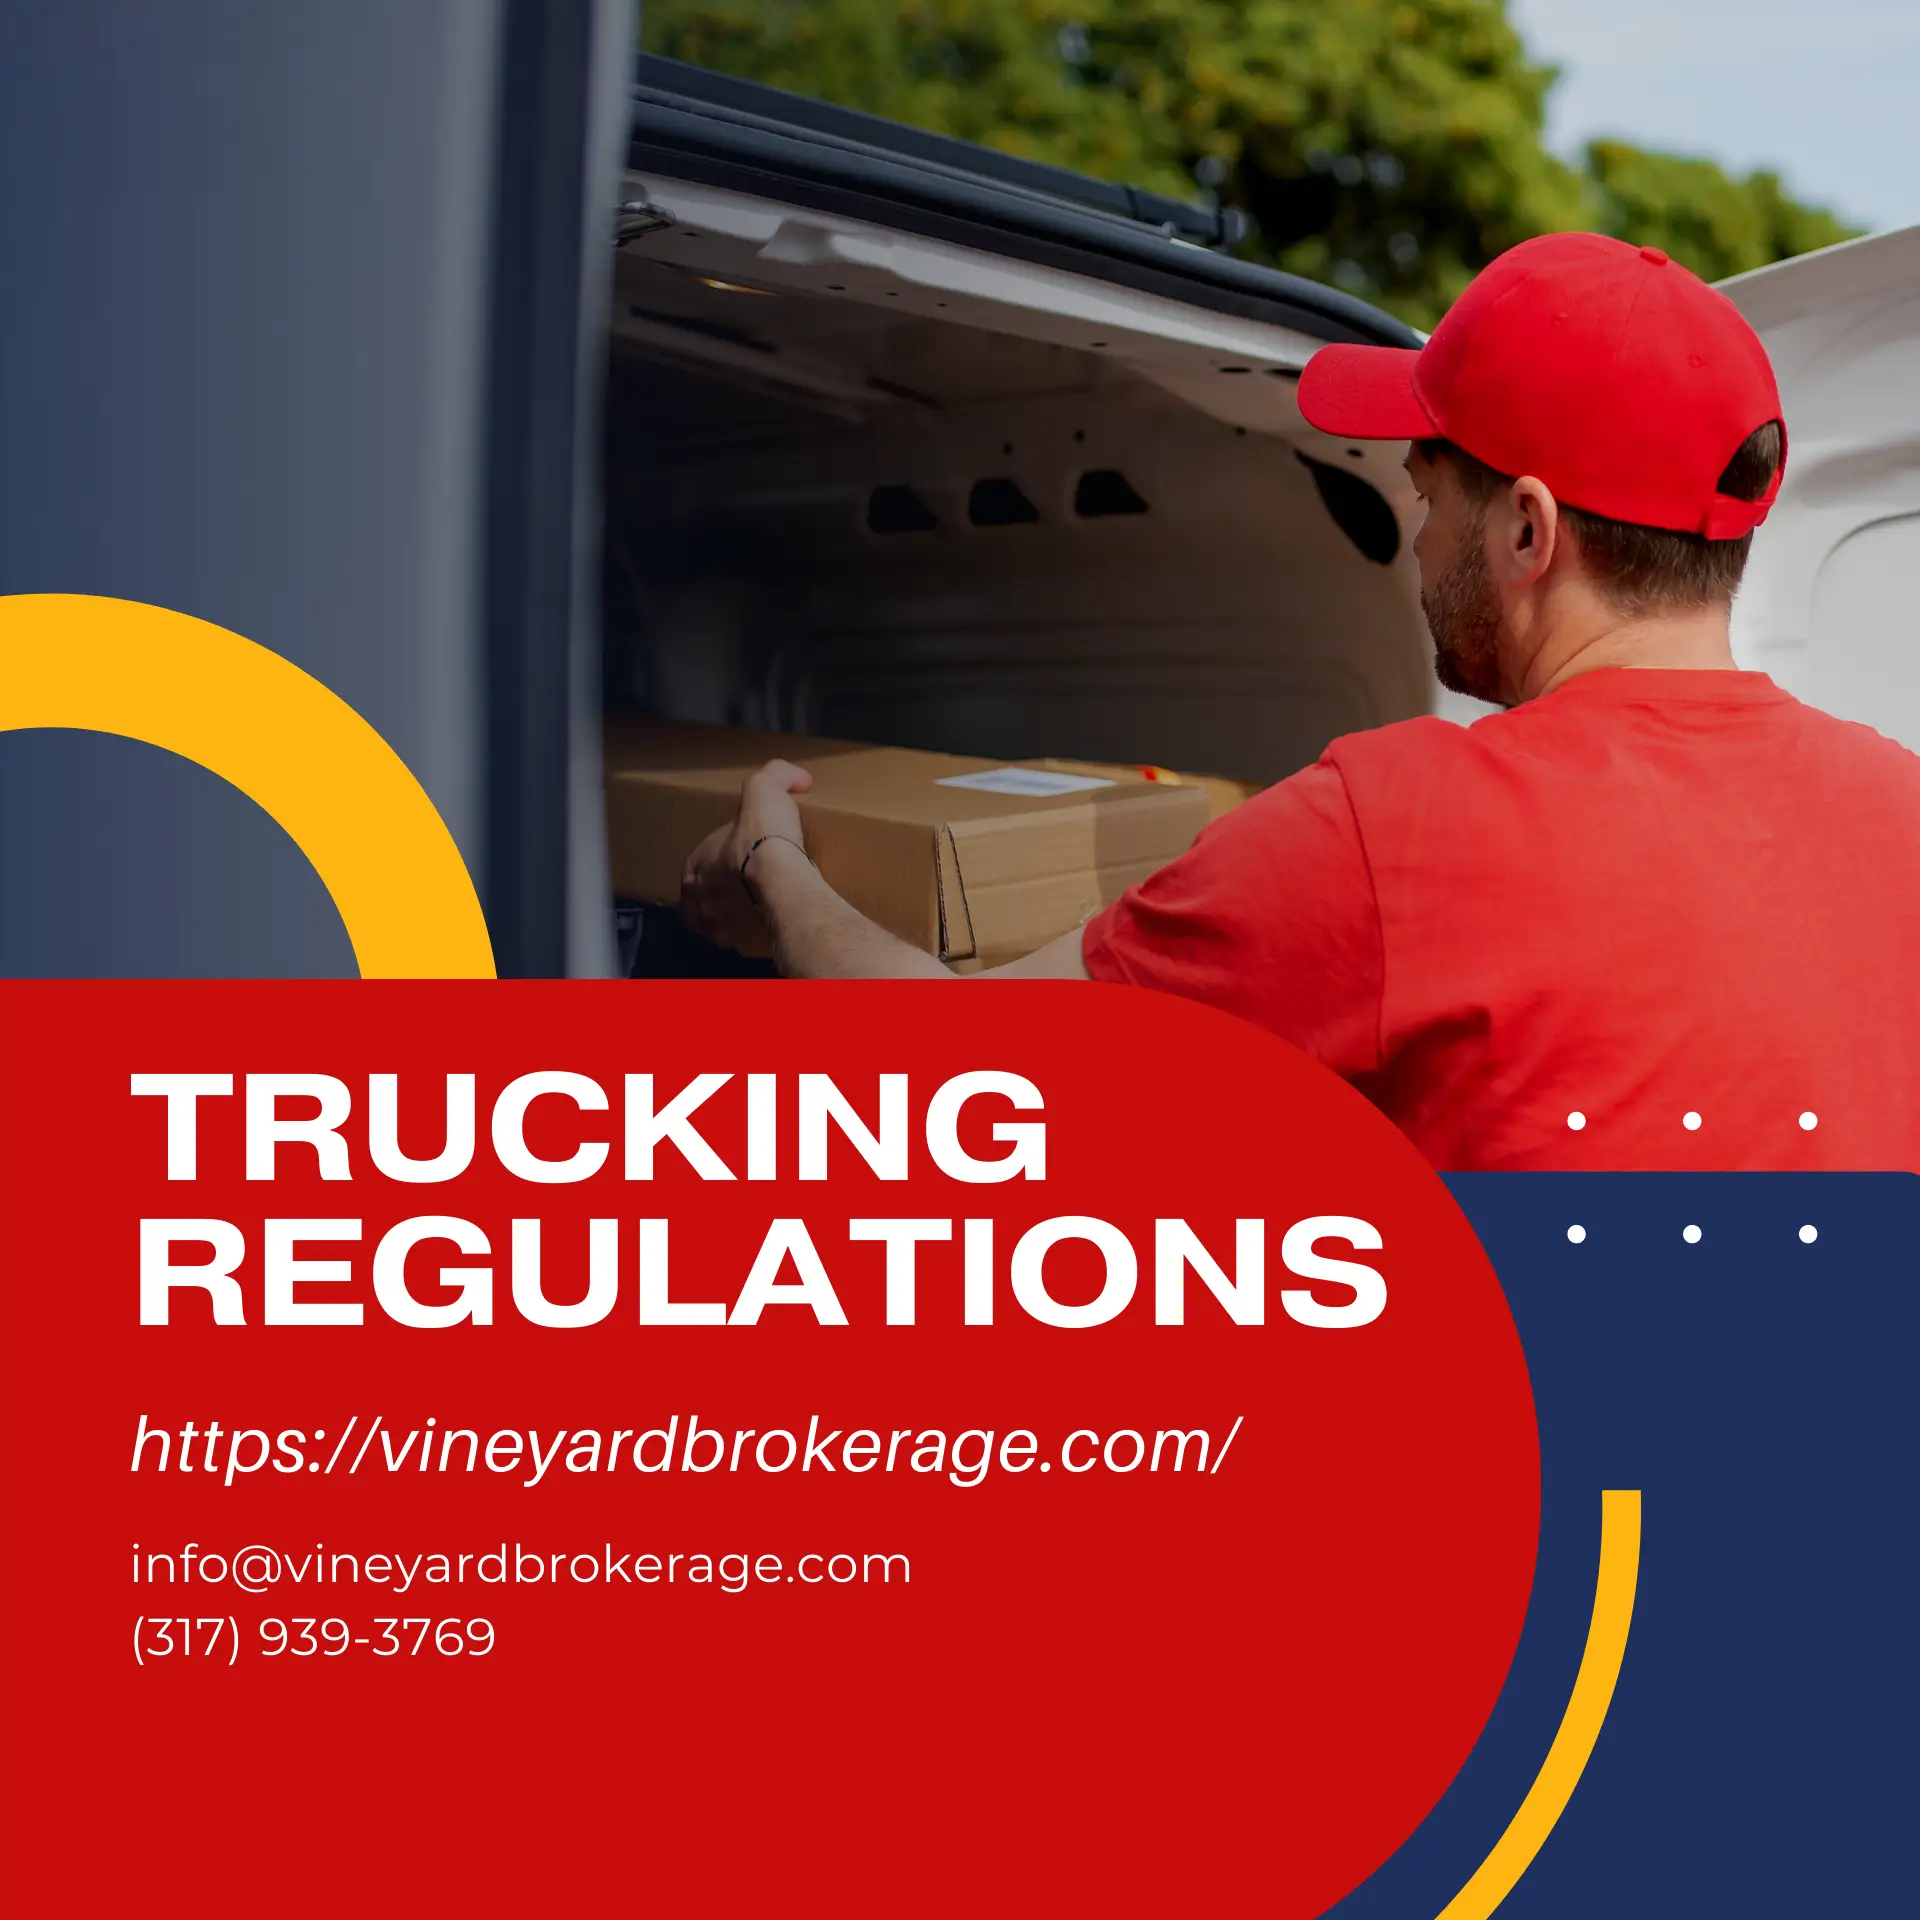 12 Trucking Regulations You Should be Aware of